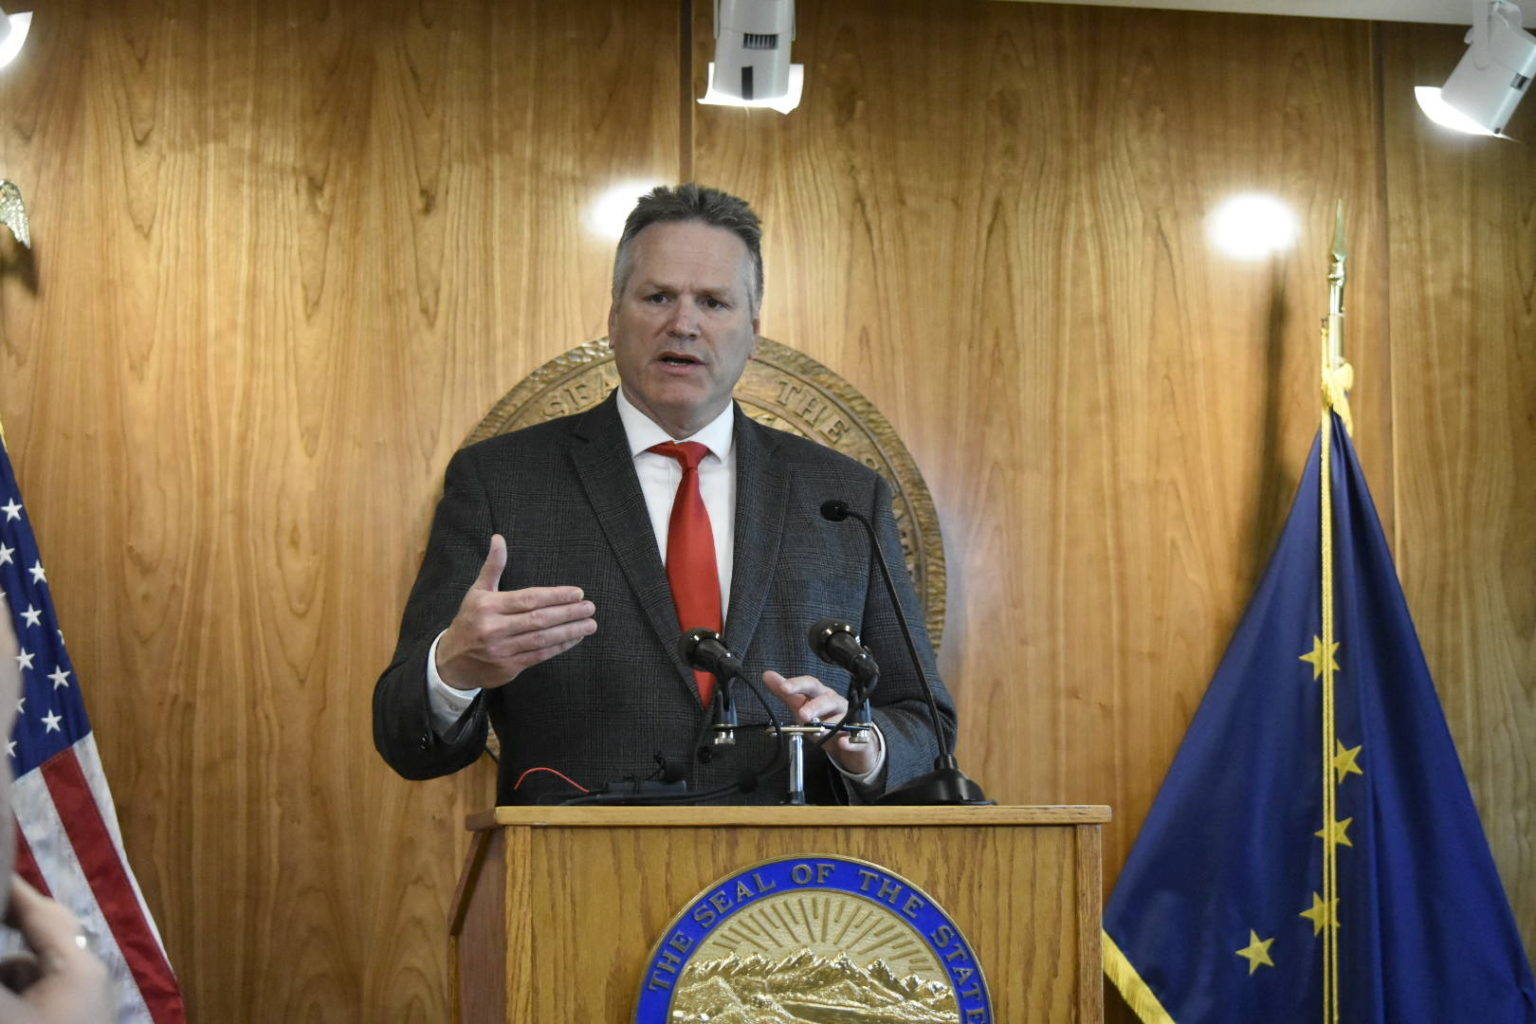 Gov. Mike Dunleavy, seen here speaking at a Jun 17, 2021 news conference at the Alaska State Capitol, announced $215 million in vetoes to the state budget Thursday, and called on lawmakers to come together to solve the state's fiscal issues. (Peter Segall / Juneau Empire file)